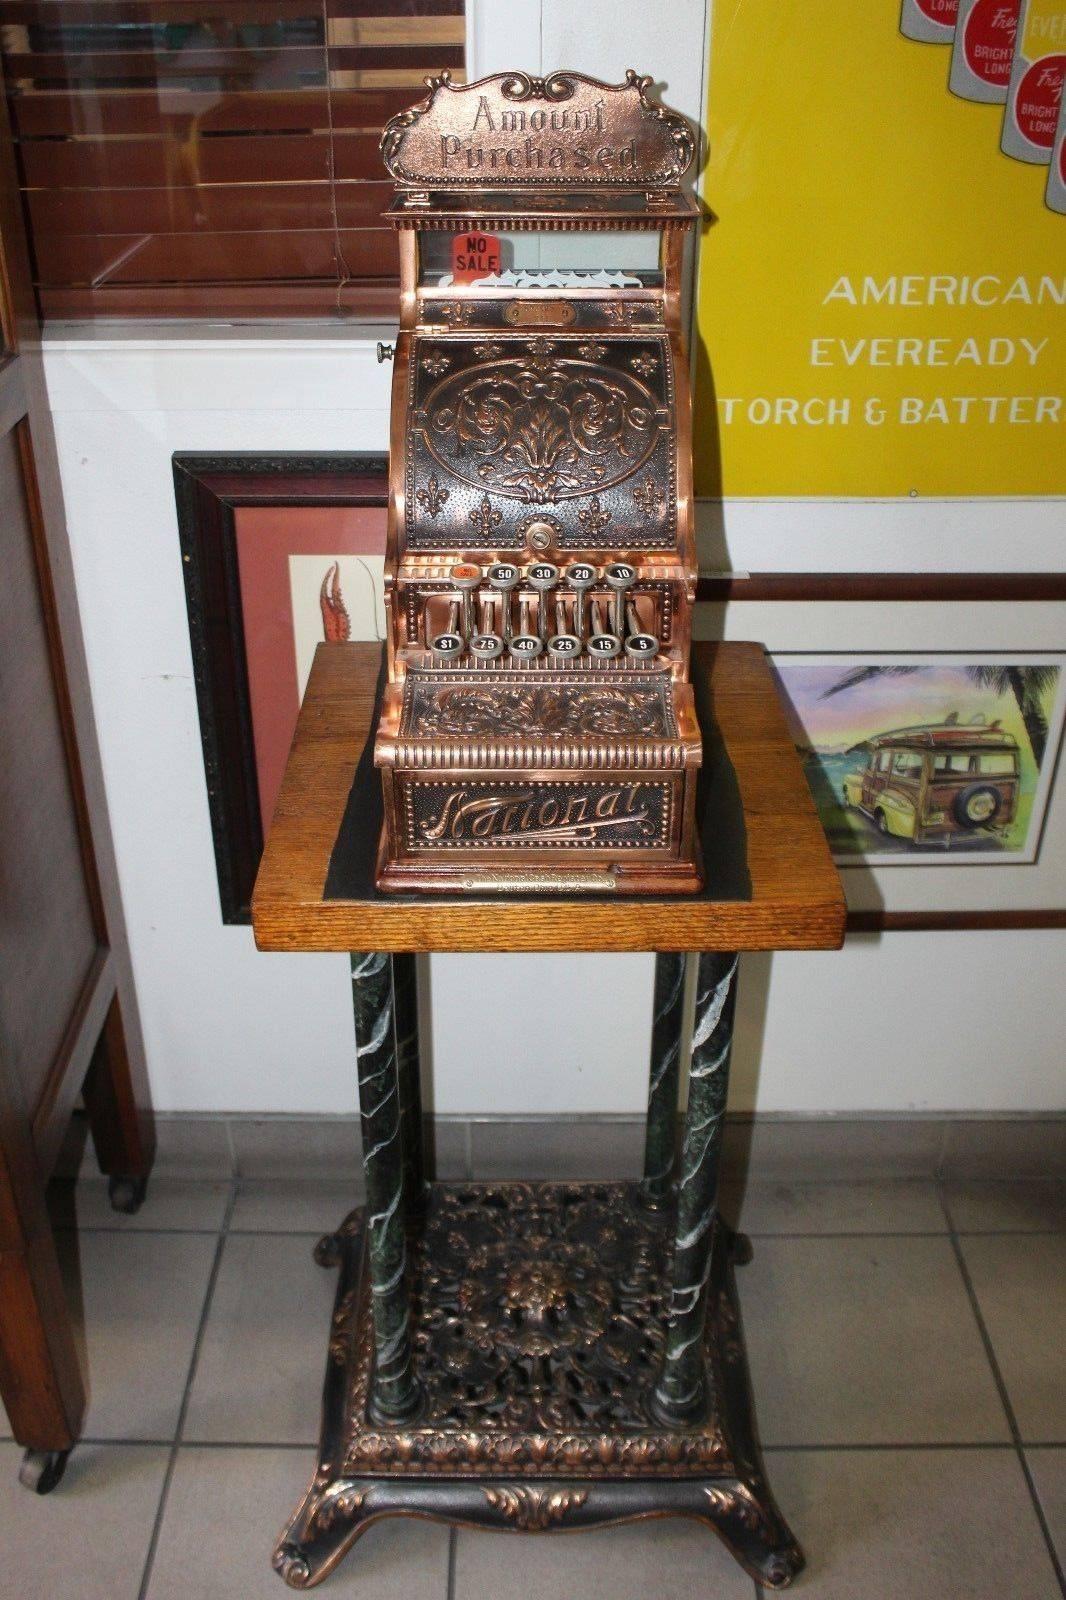 In the early 1900s, elaborate brass registers were made. Cash registers became staples in most retail stores, and to provide stronger security measures, cash registers were made with elaborate cast-metal cases from 1888-1915. About World War I, the